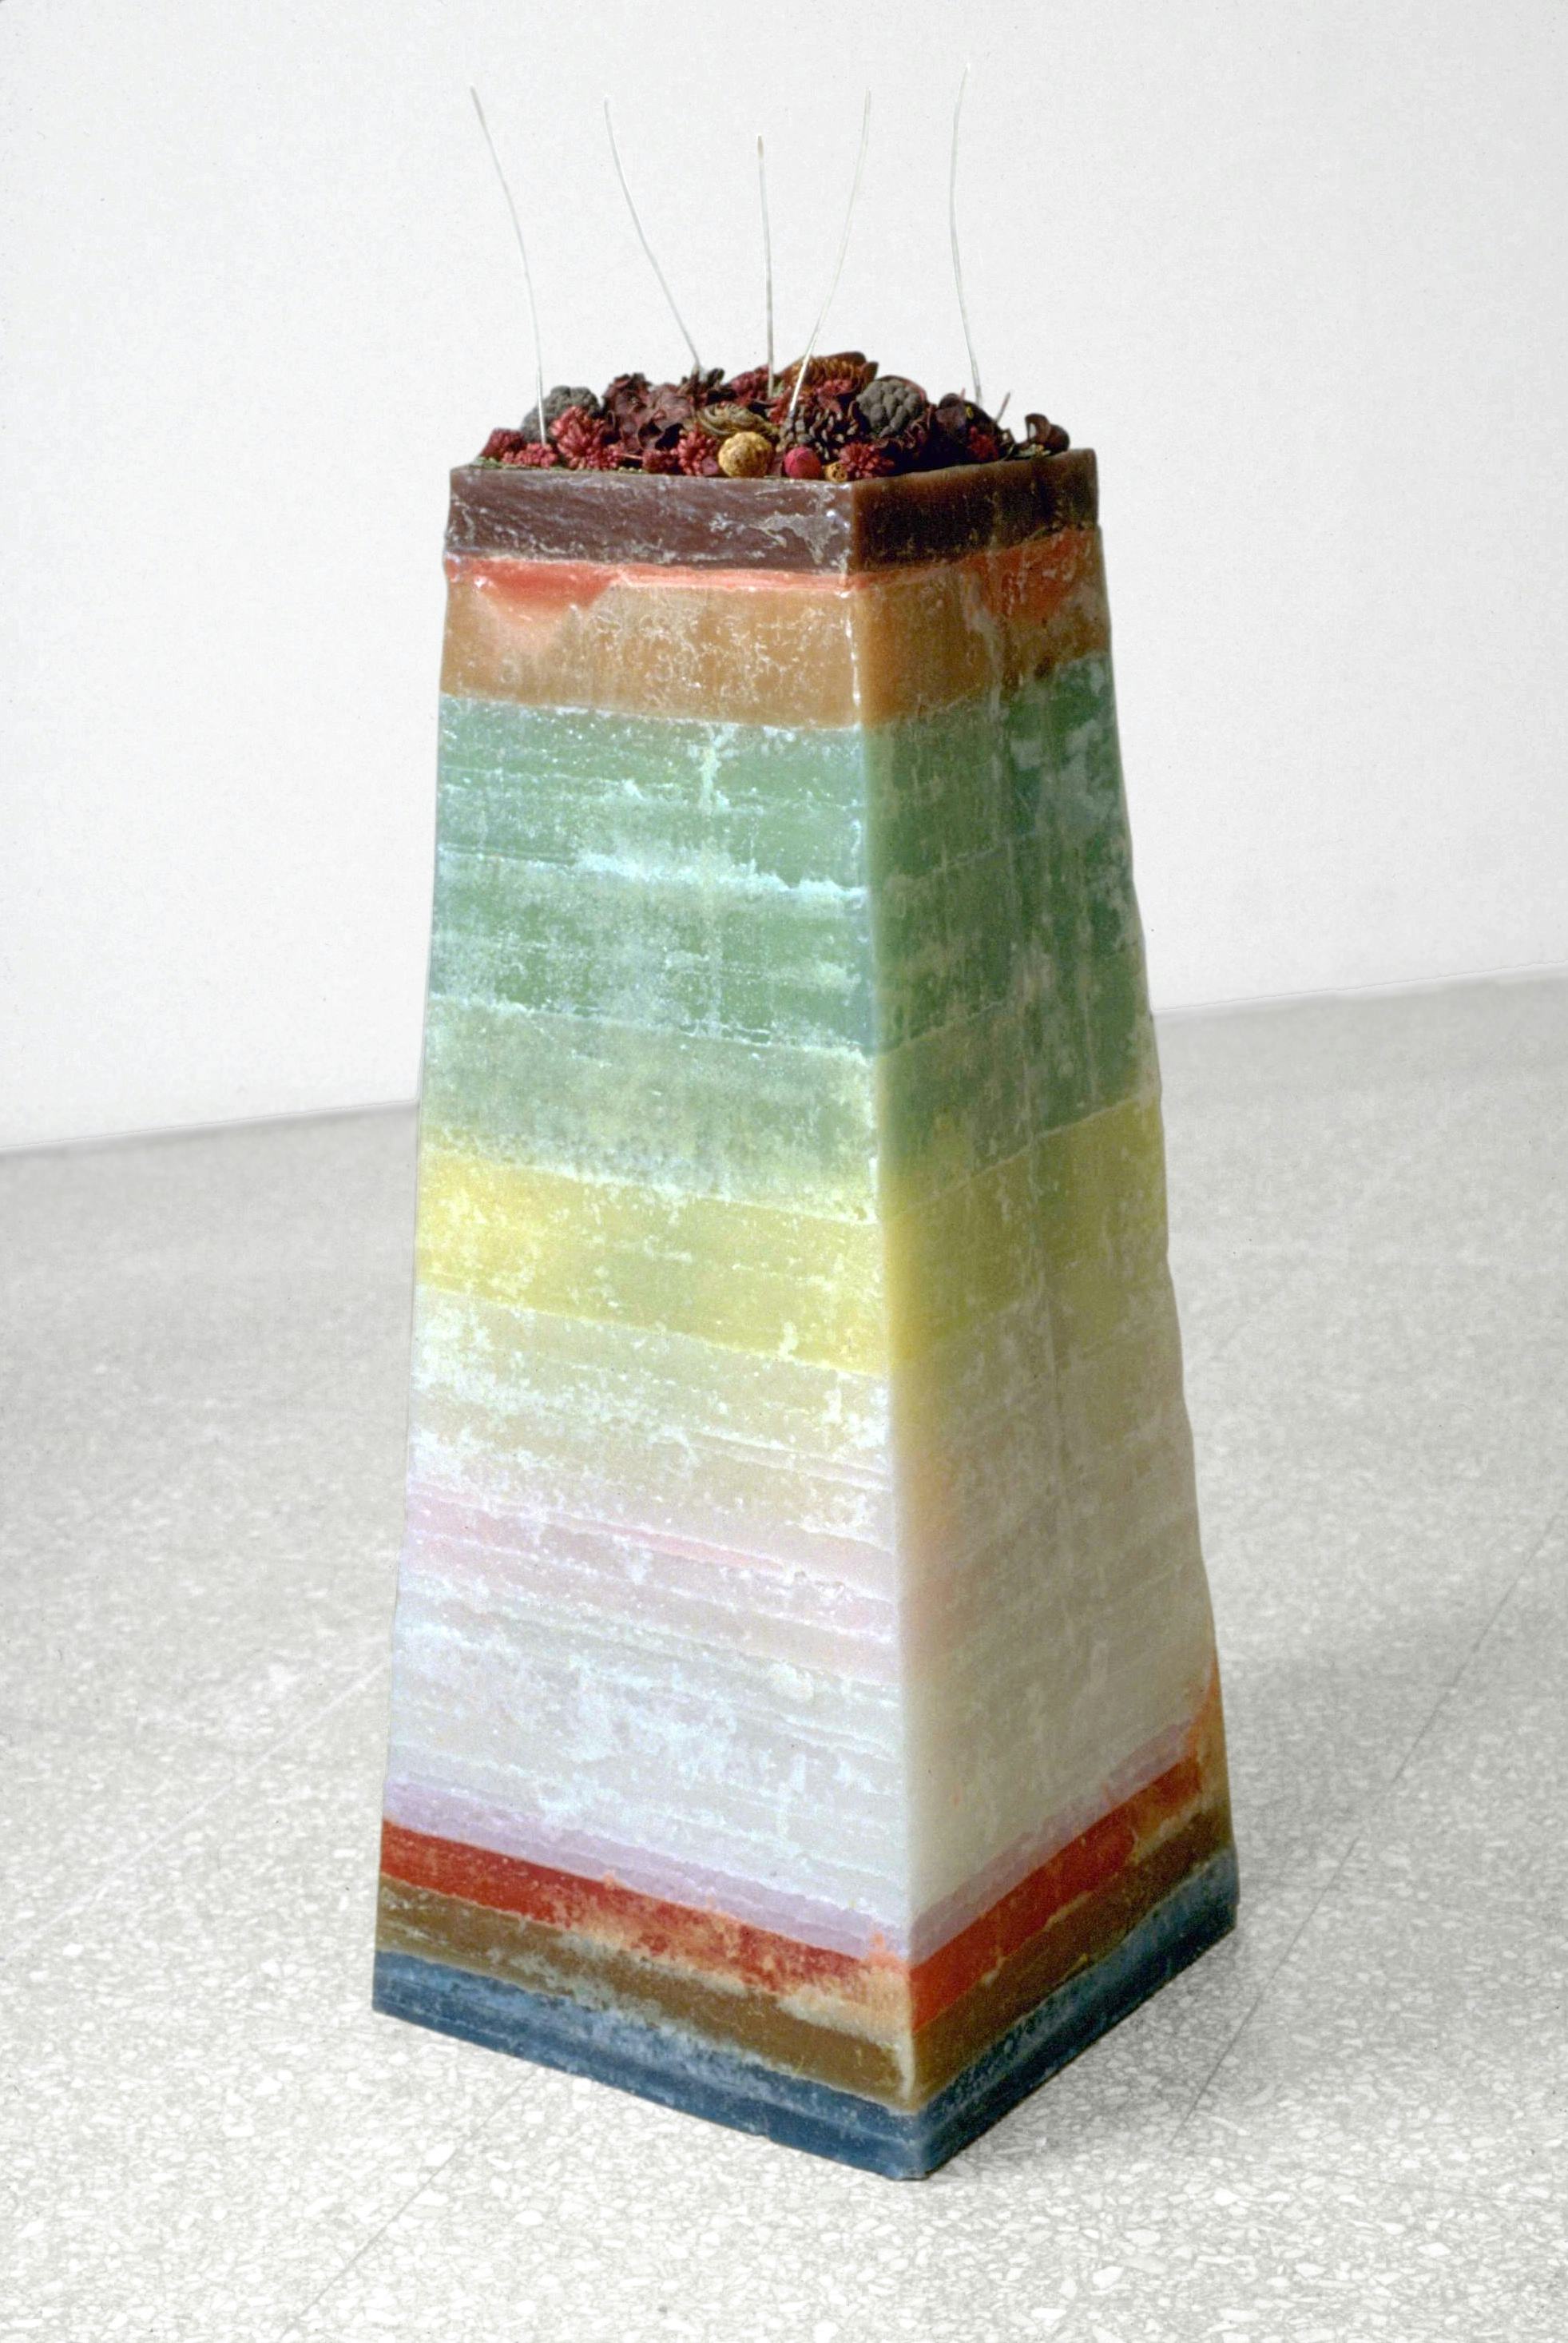 Self Portrait as an Aroma Therapy Candle (1999)
Wax, essential oils, potpourri and wicks
42h x 16w x 16d inches